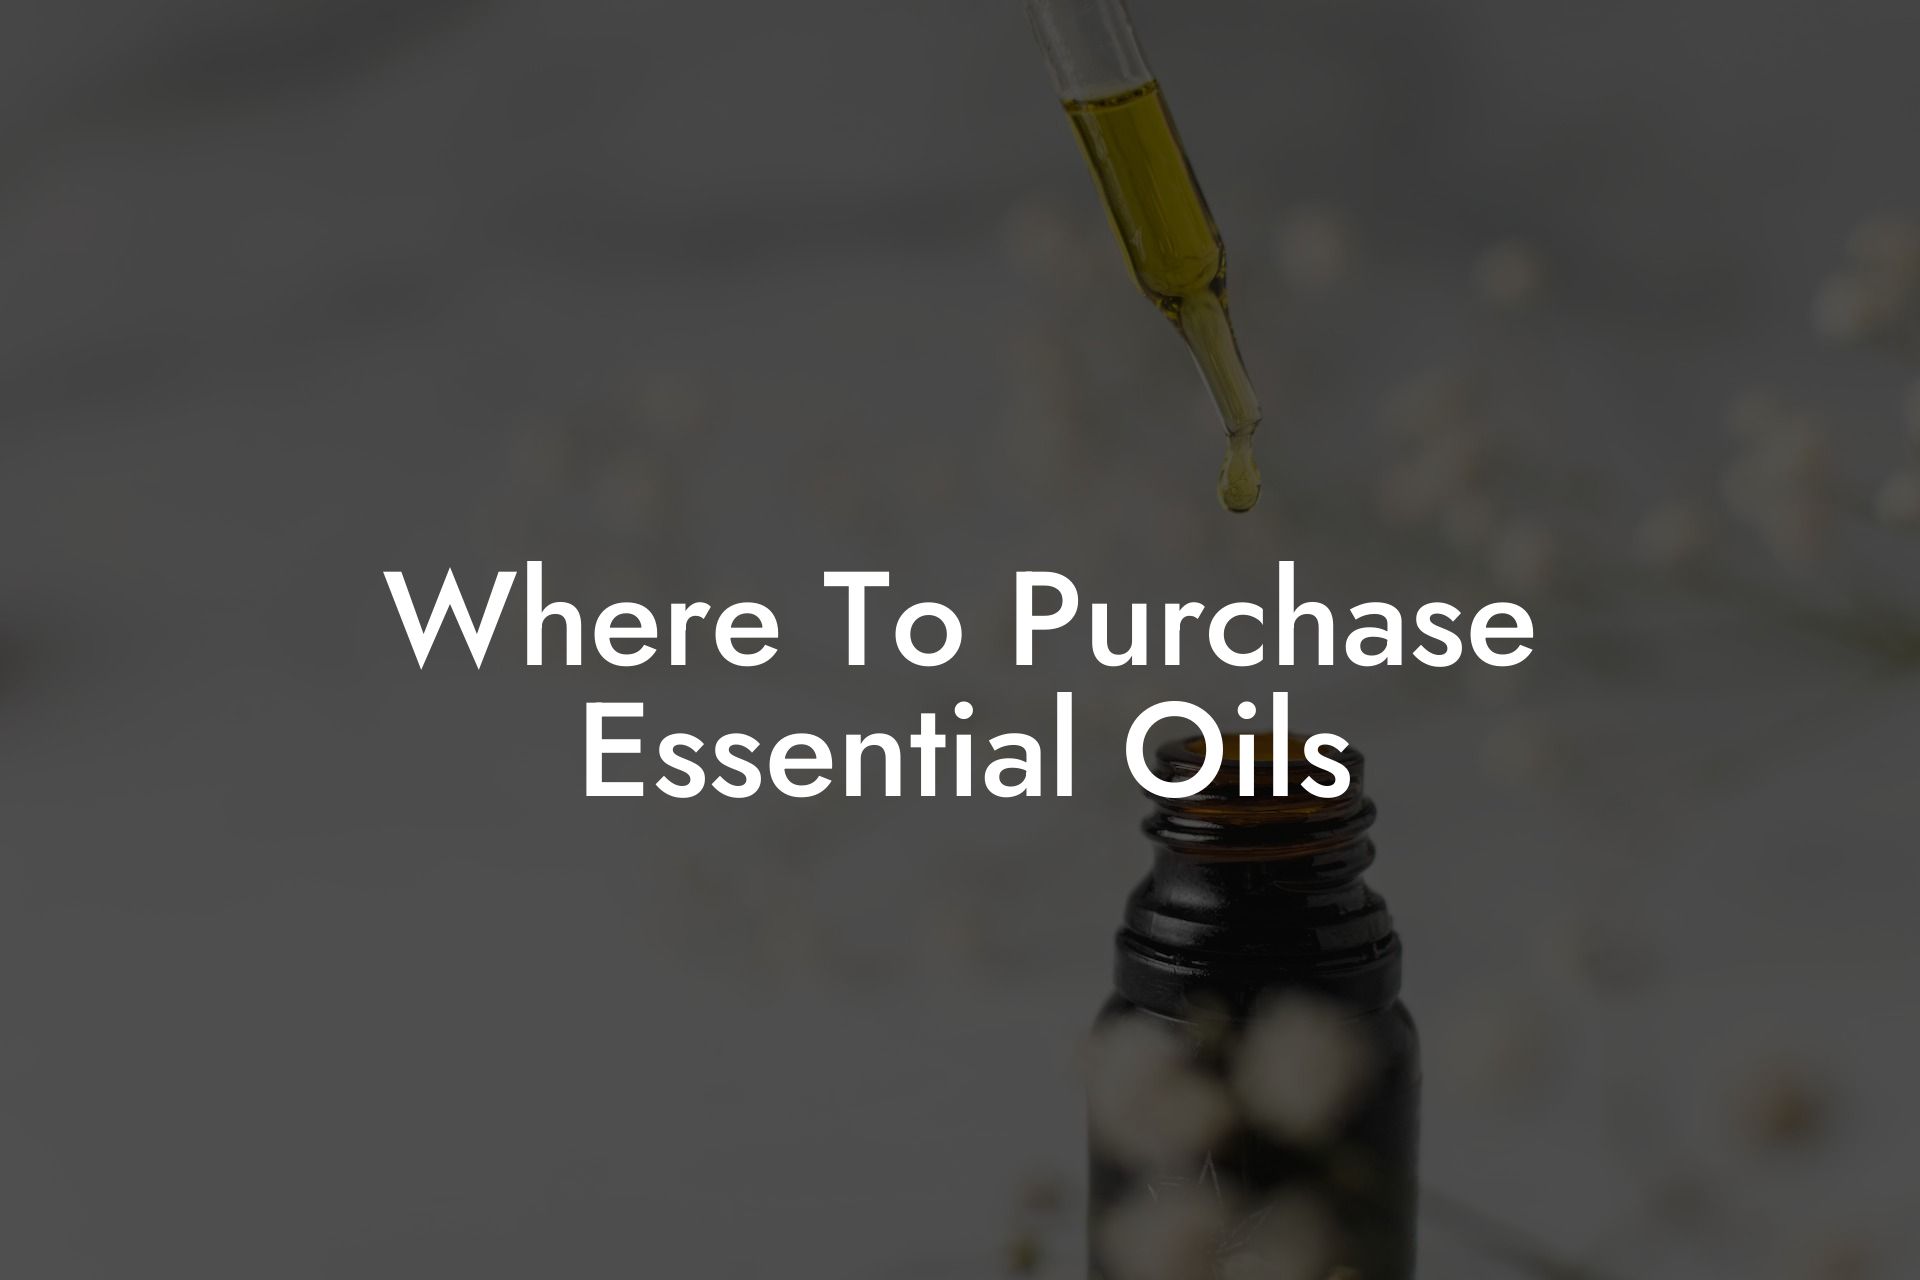 Where To Purchase Essential Oils